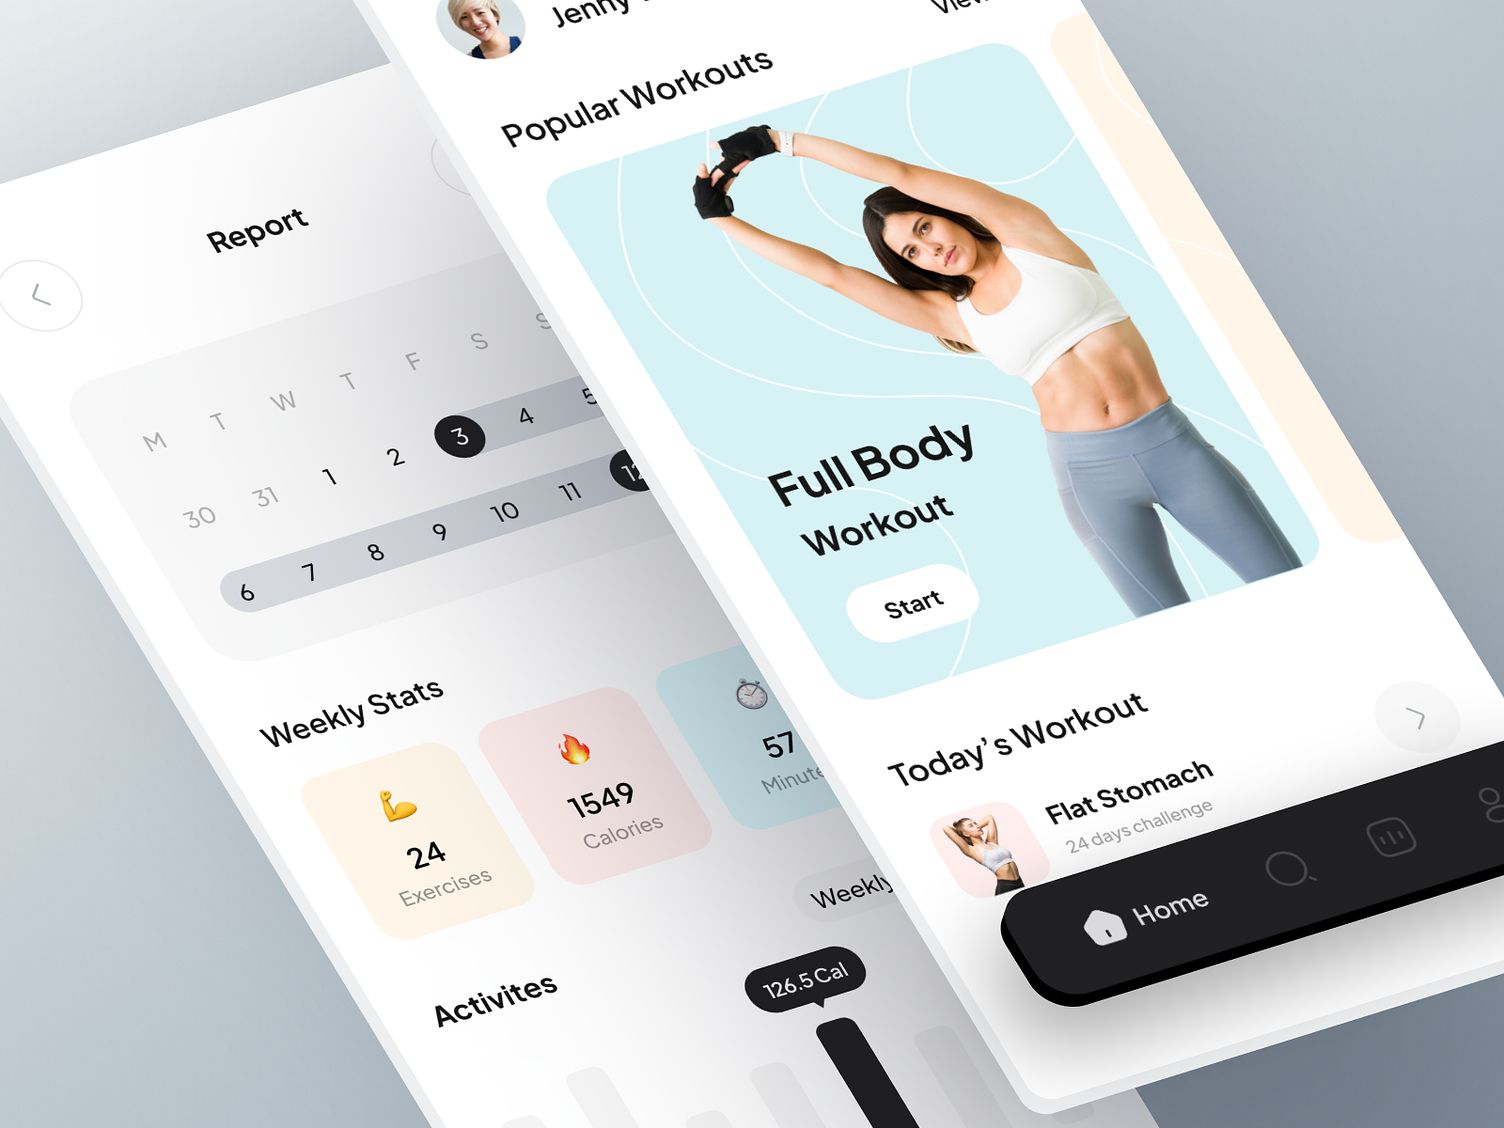  The fitness app is designed to minimize complexity for effortless navigation and usage